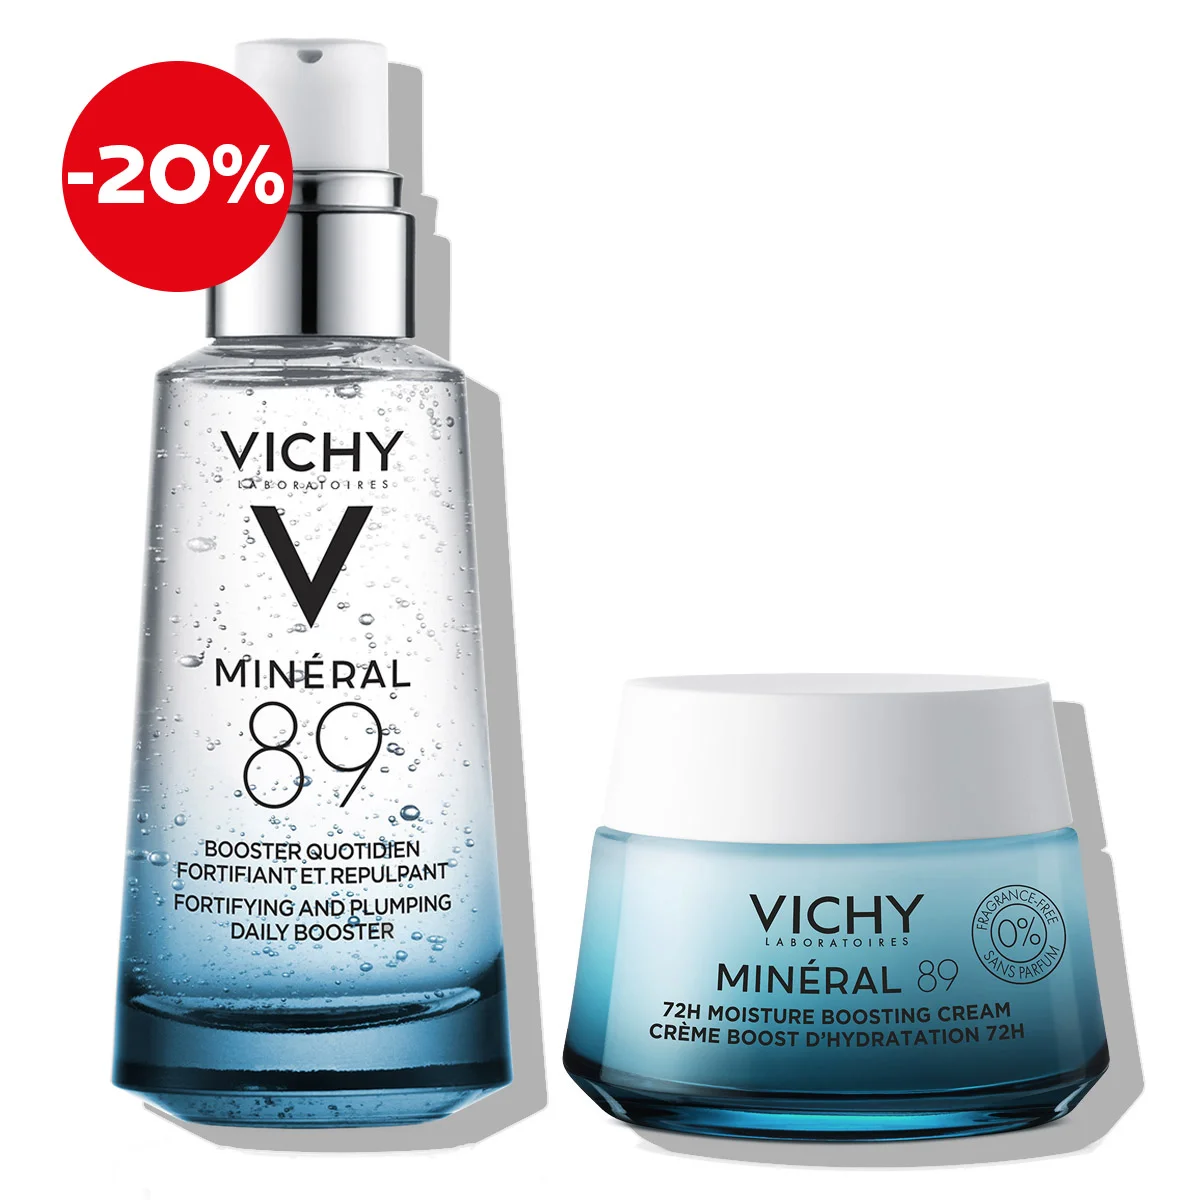 Vichy MINERAL 89 Protocol for intensive hydration and stronger skin for all skin types (2)